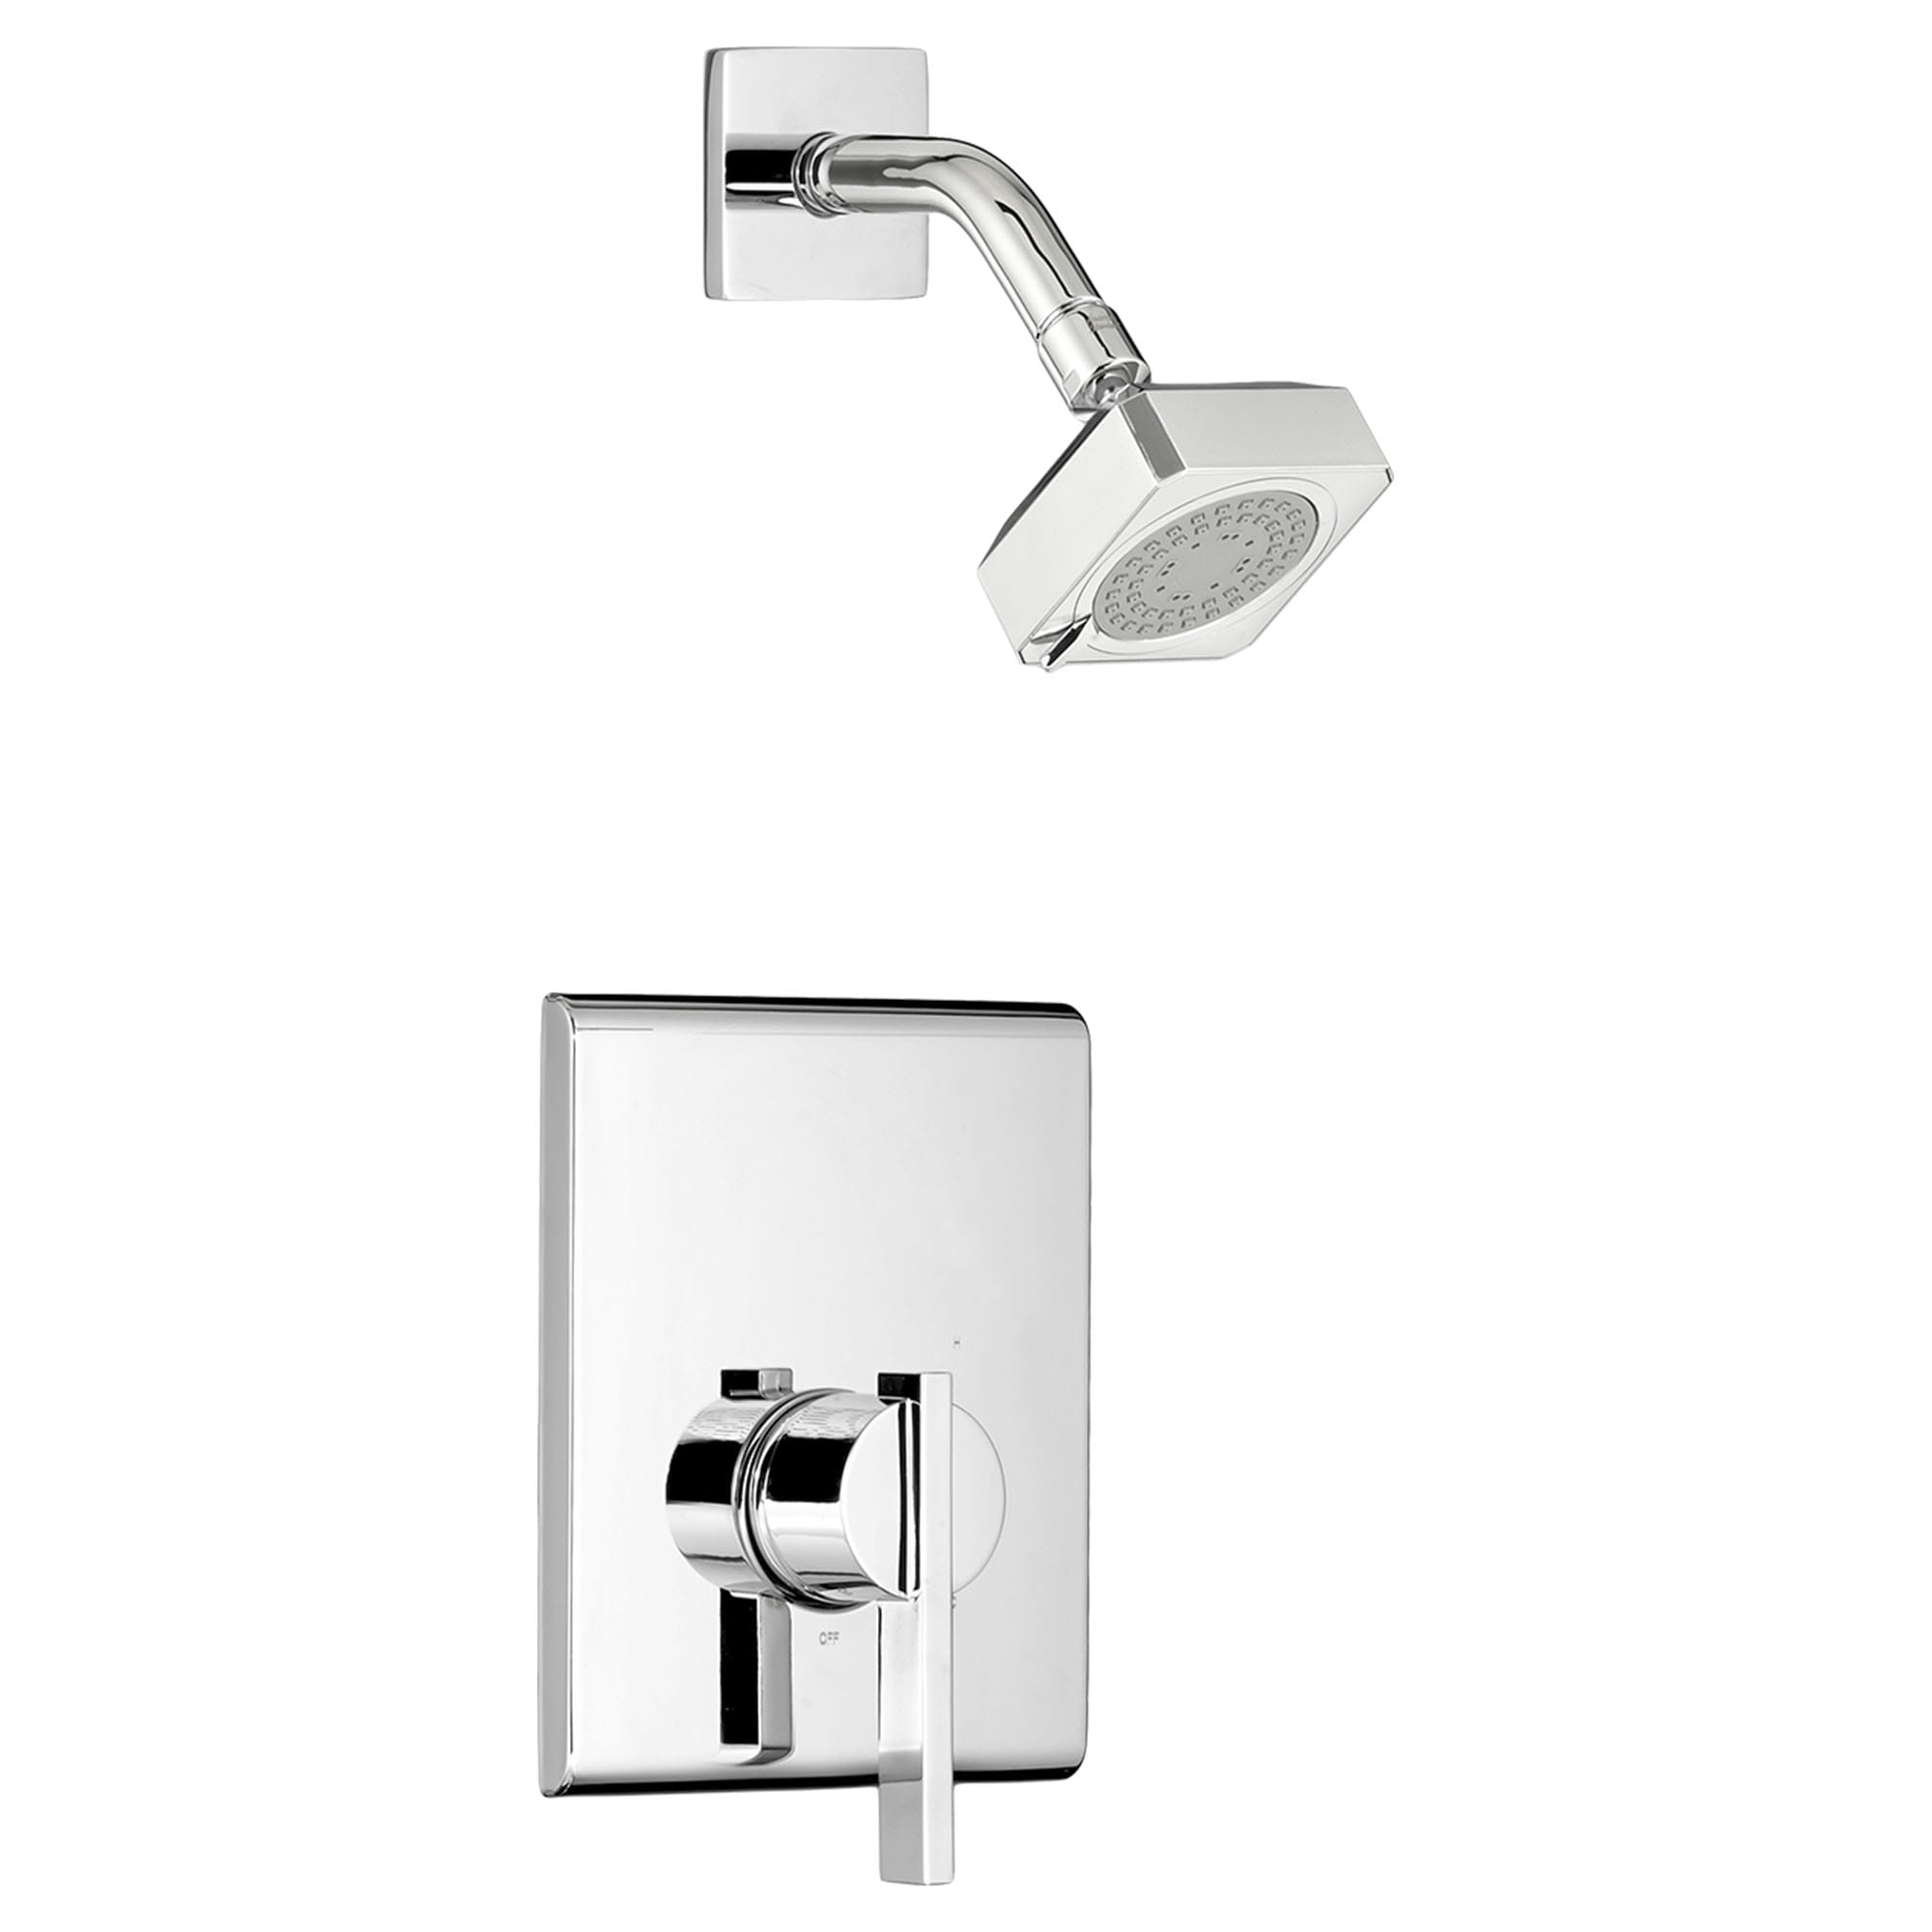 Times Square 175 gpm 66 L min Shower Trim Kit With Water Saving Showerhead Double Ceramic Pressure Balance Cartridge With Lever Handle CHROME